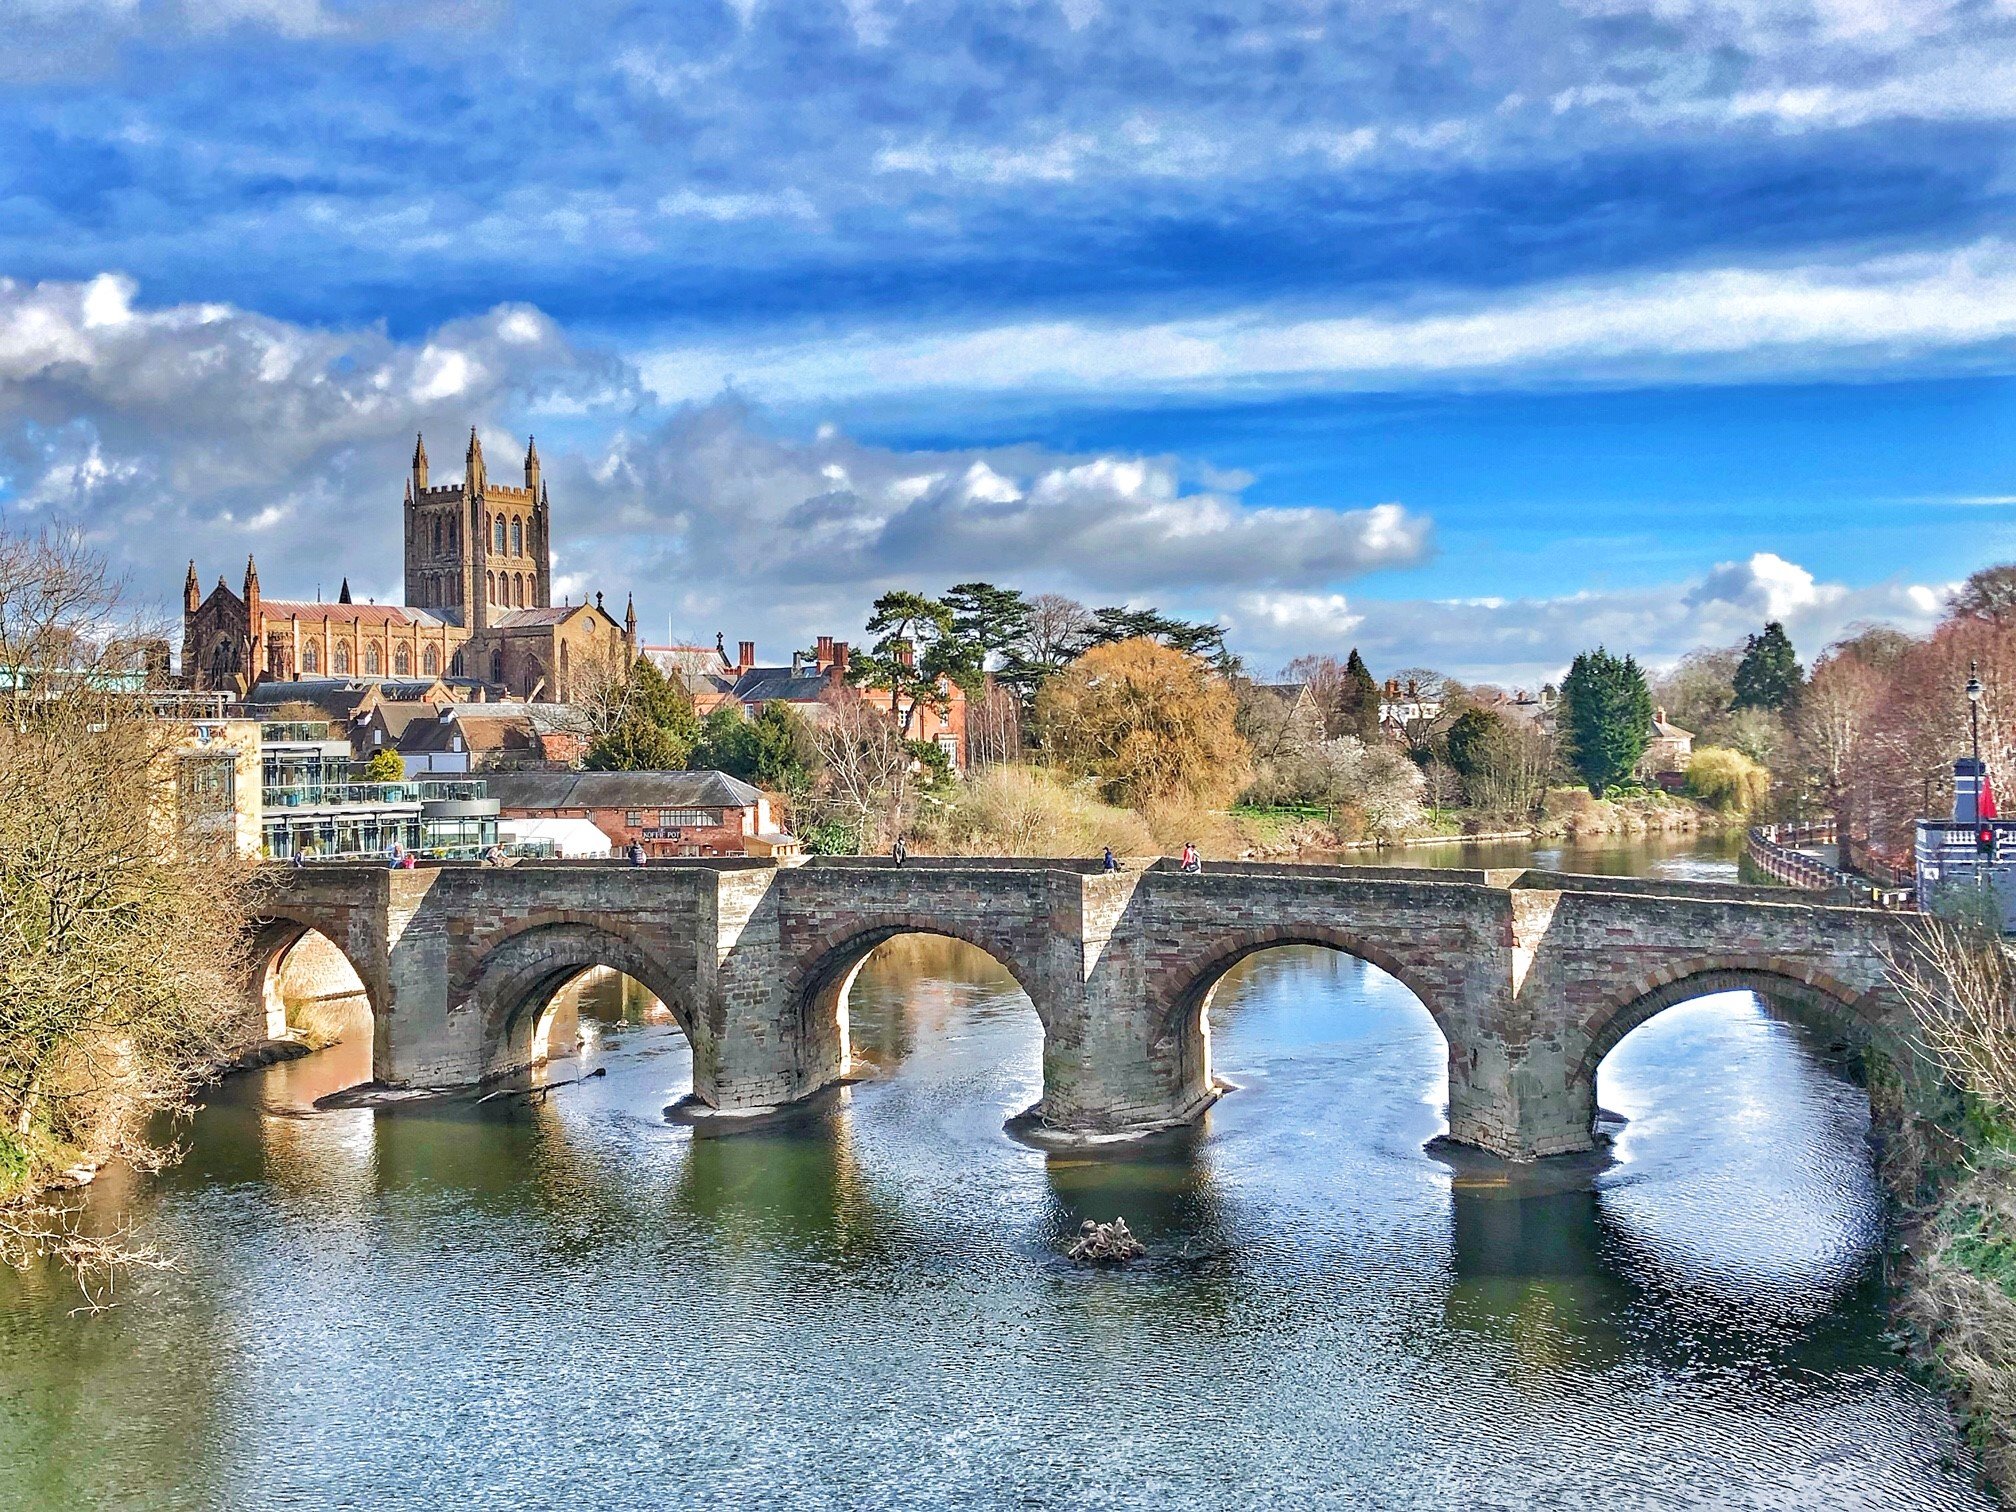 Hereford old bridge over the rive wye, The cathedral is in the background and the sky is a bright shade of blue